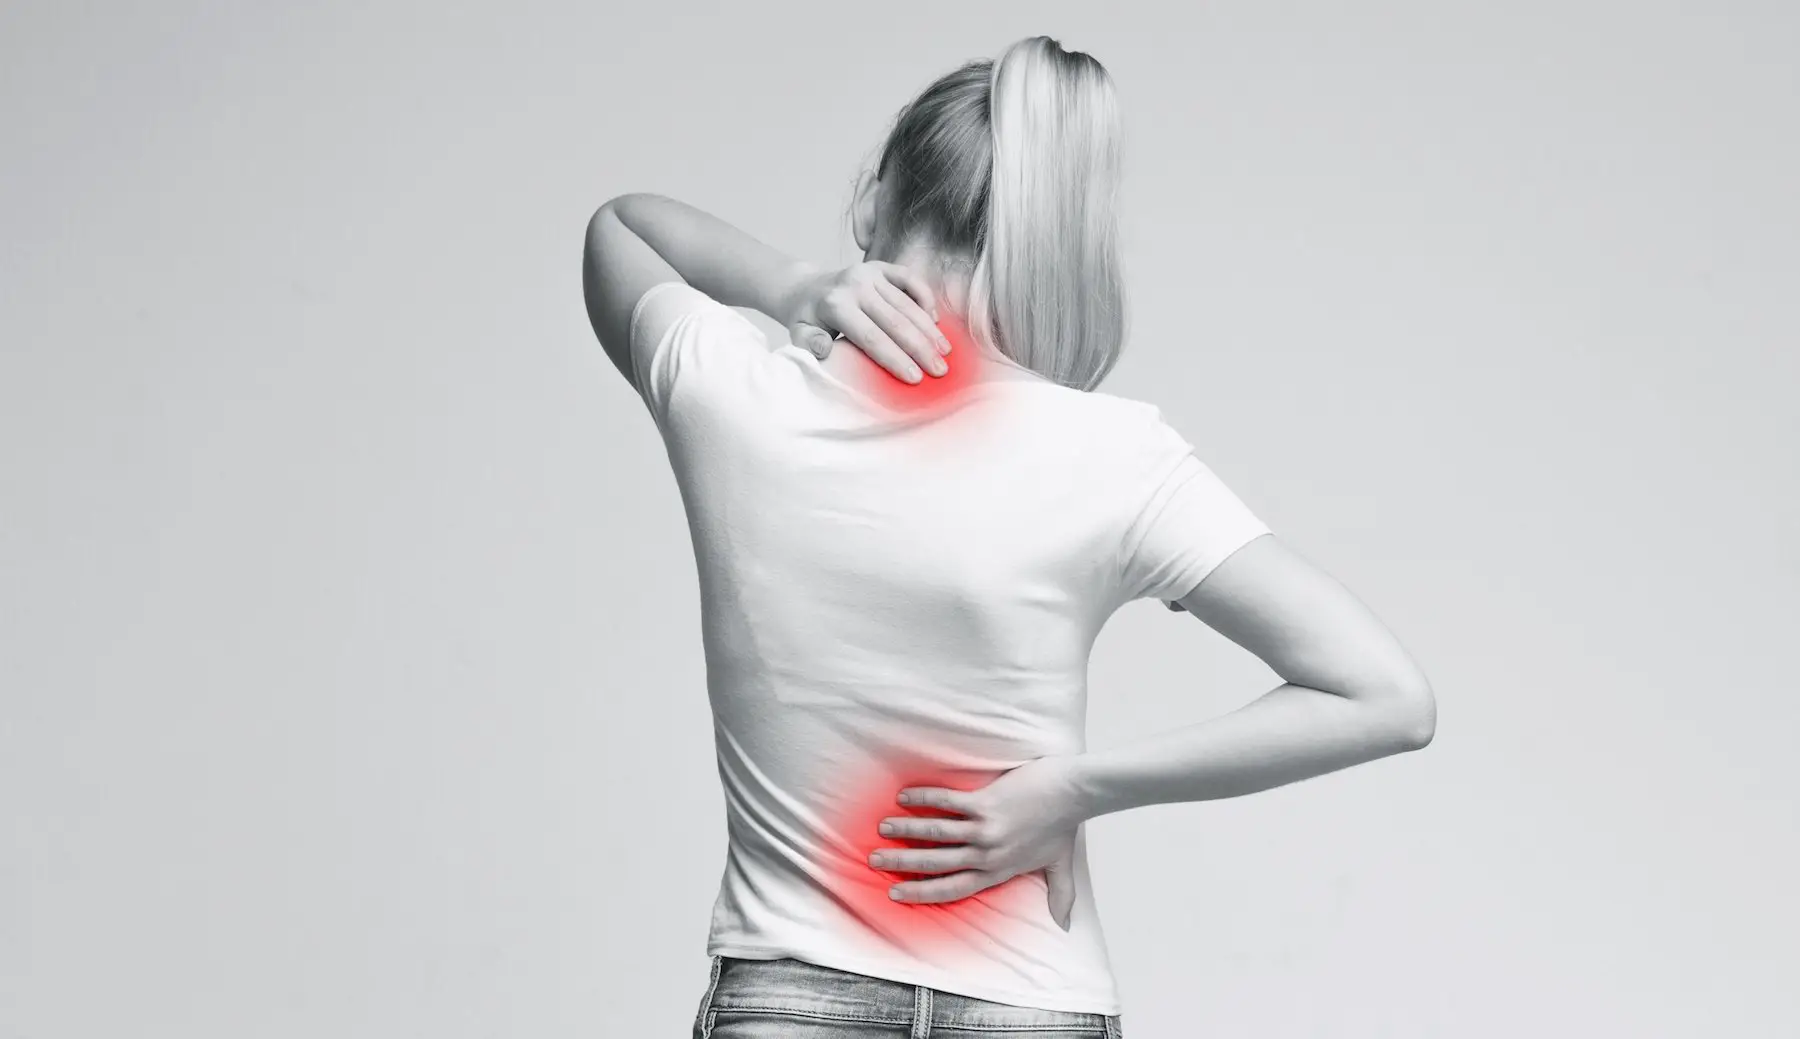 What Kind of Back Pain do you Have?